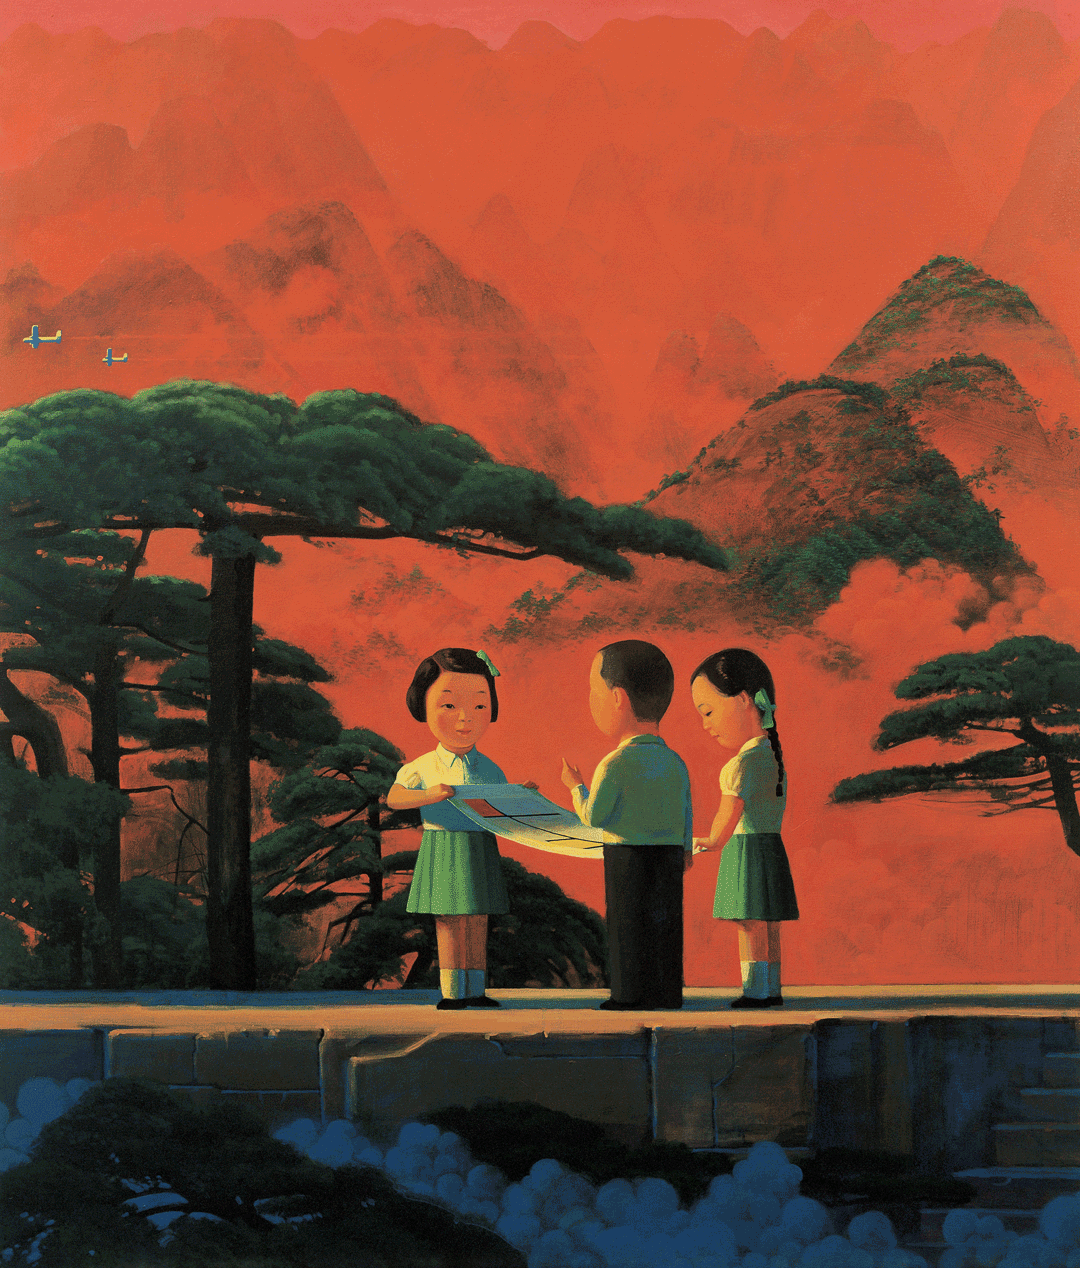 A painting by Liu Ye, titled Viewing the Painting, dated 1999.